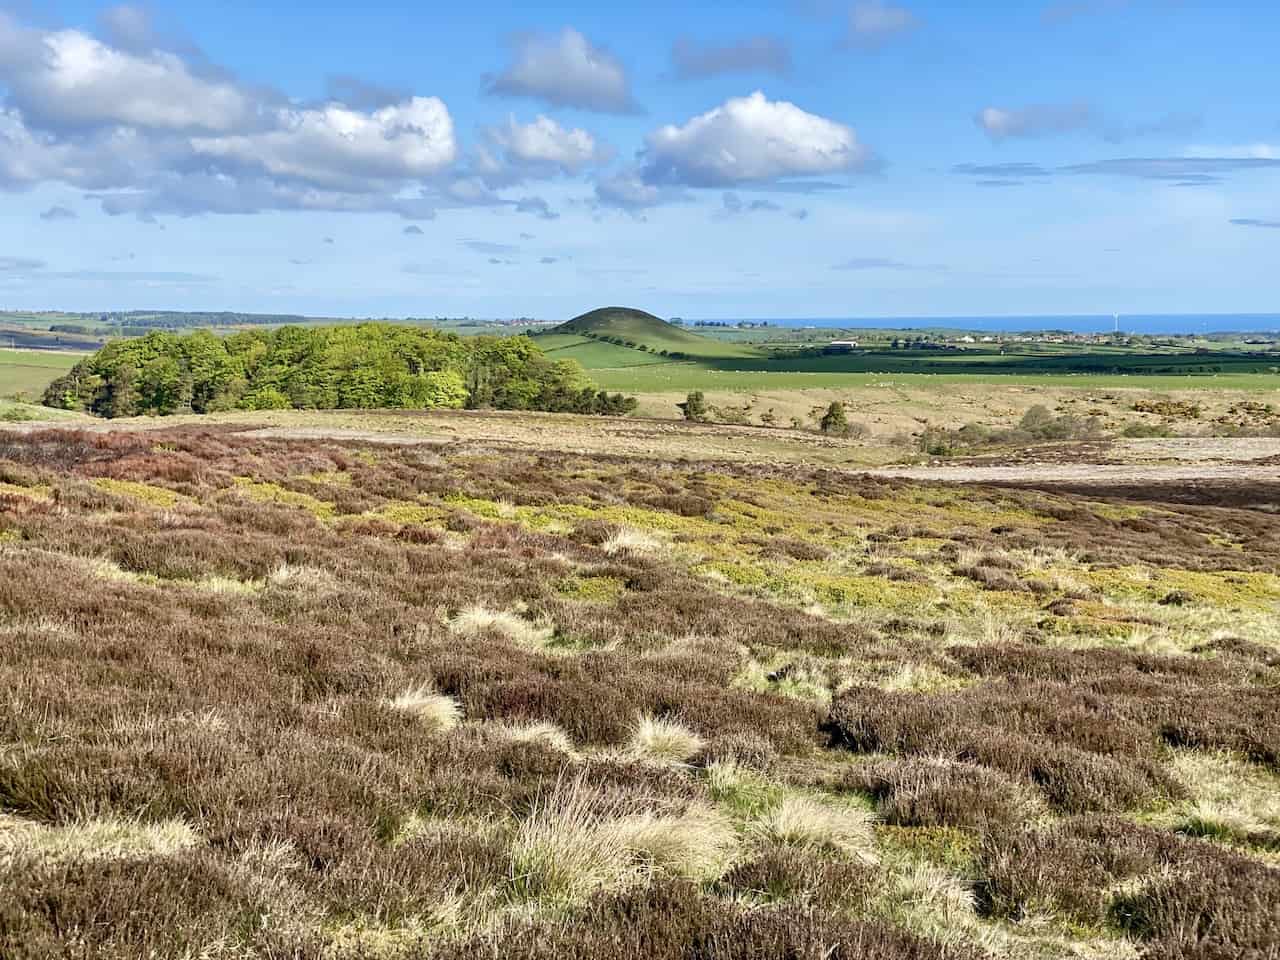 Tomgate Moor and Freebrough Hill, with the North Sea just visible on the horizon.